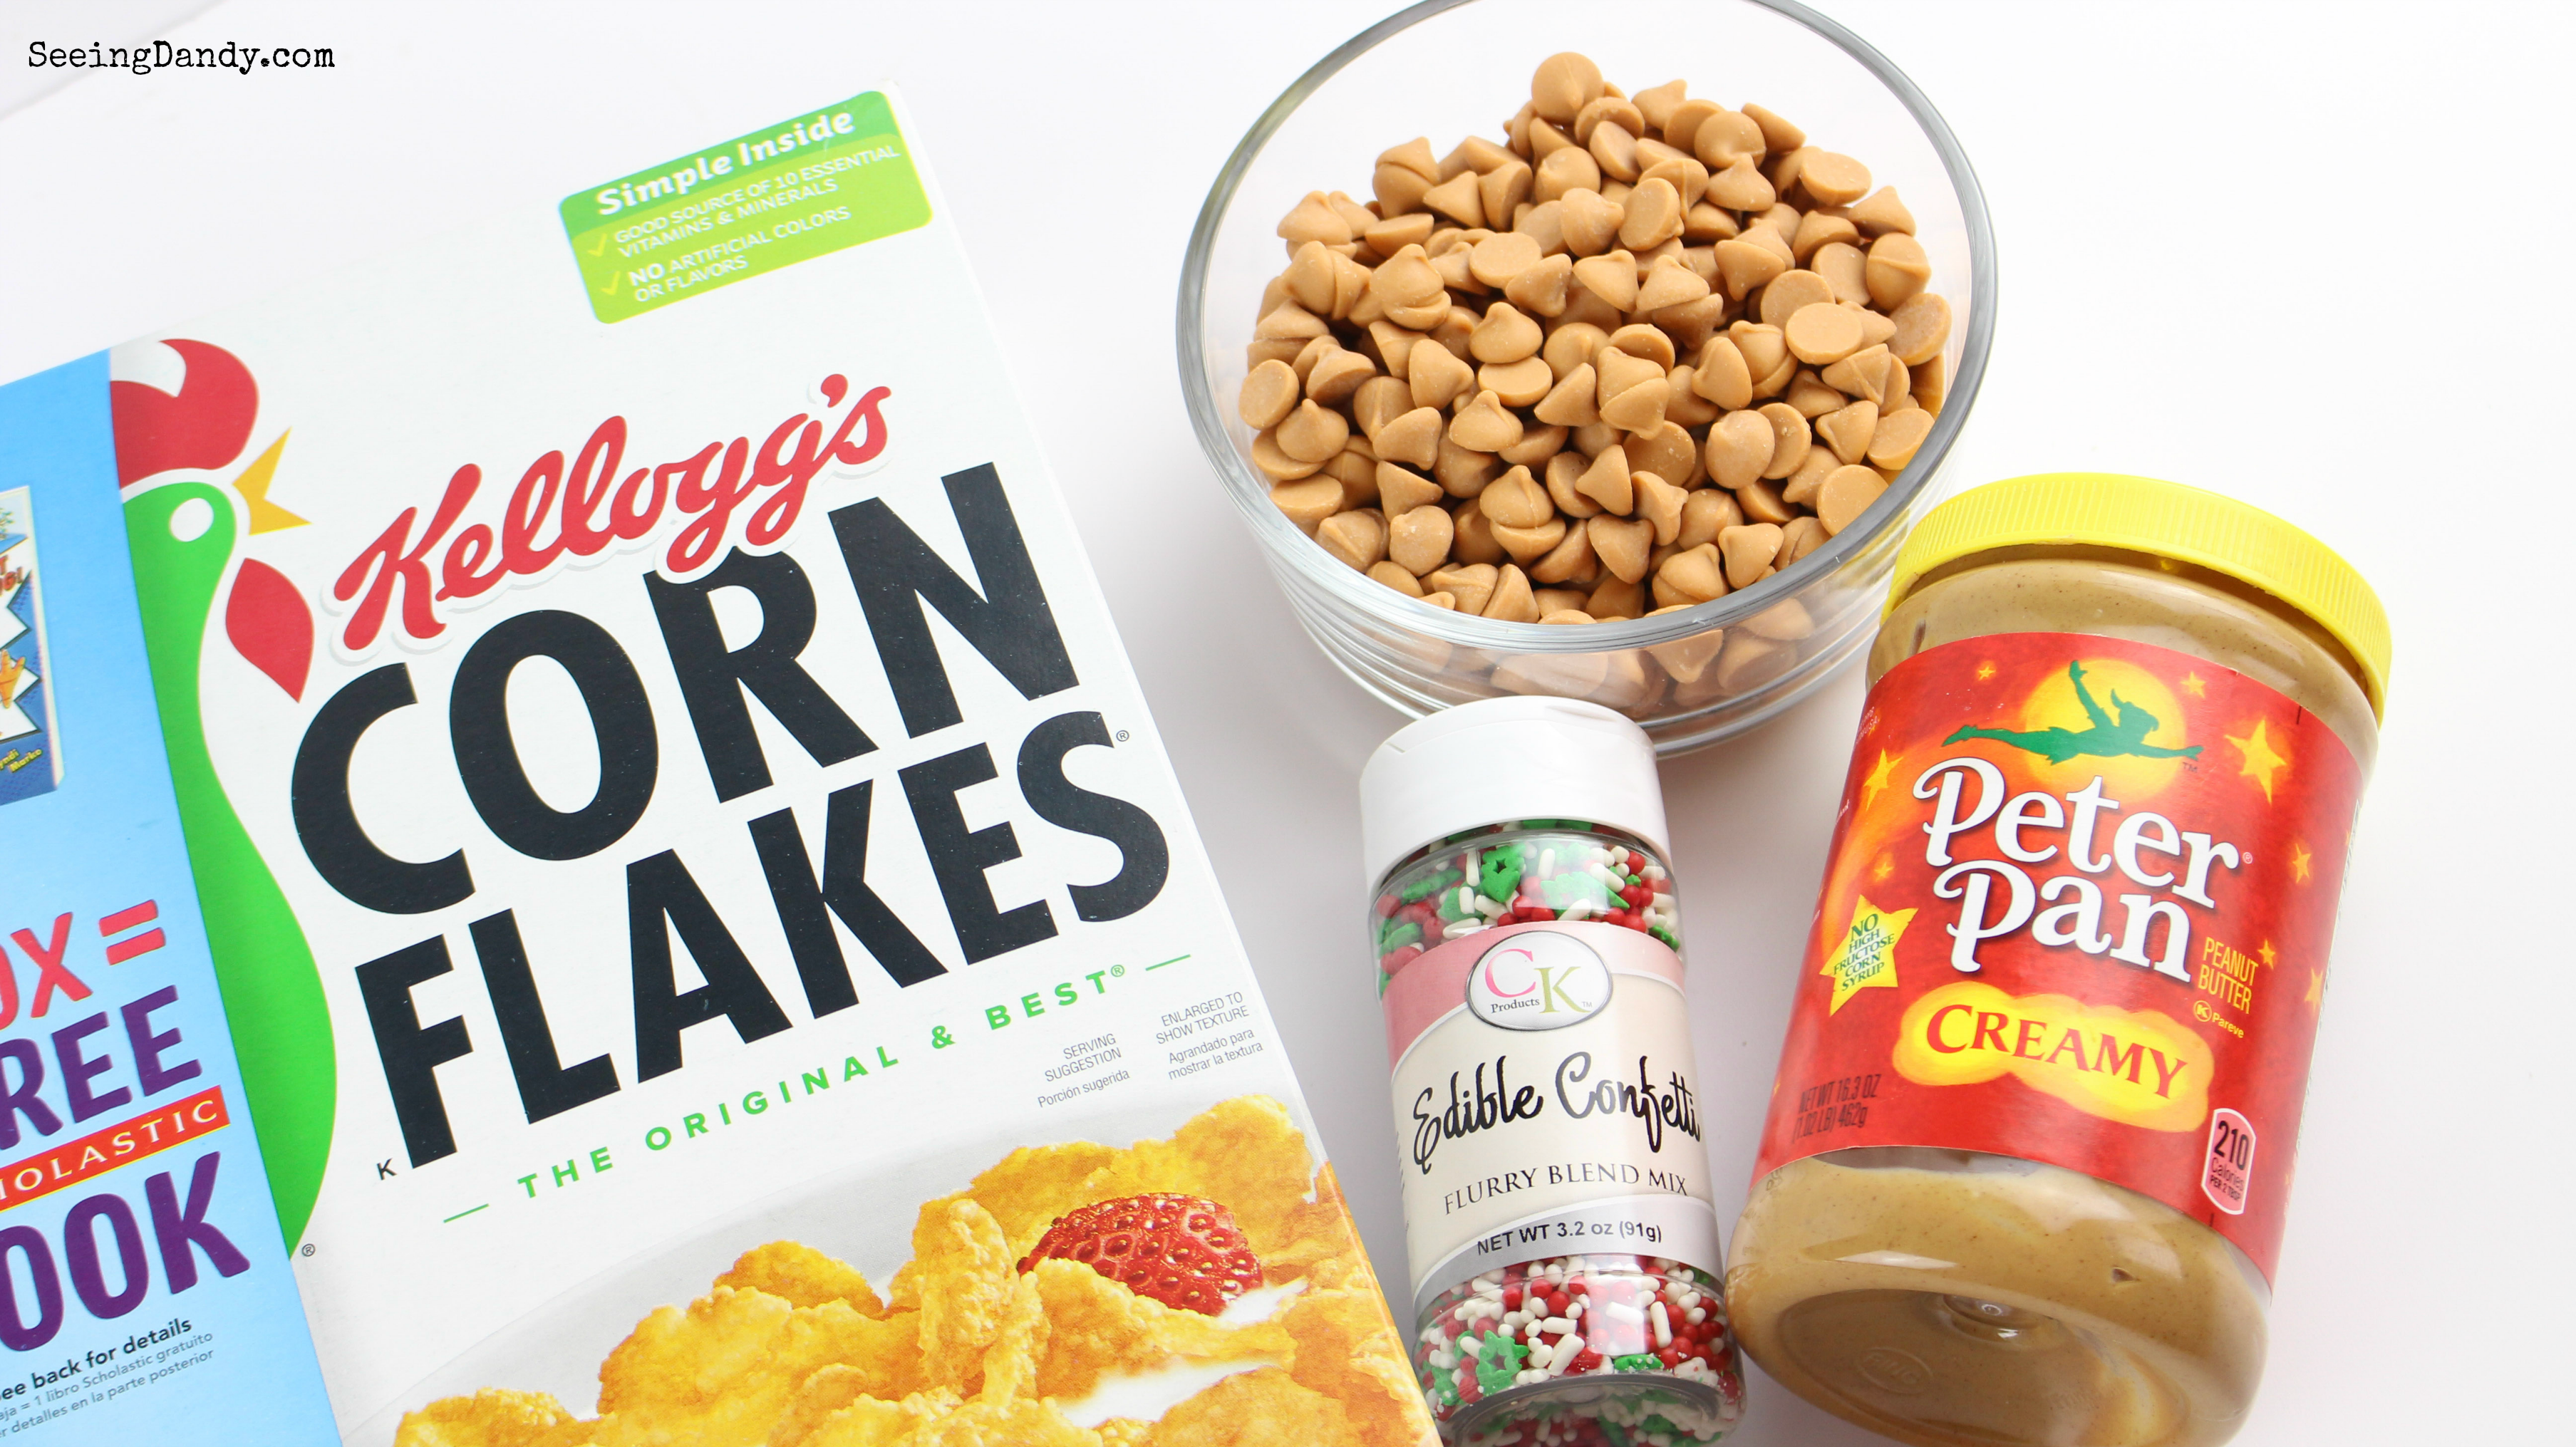 Ingredients for easy to make Christmas Crunchies No Bake Holiday Treats. Butterscotch morsels, corn flakes, peanut butter, sprinkles